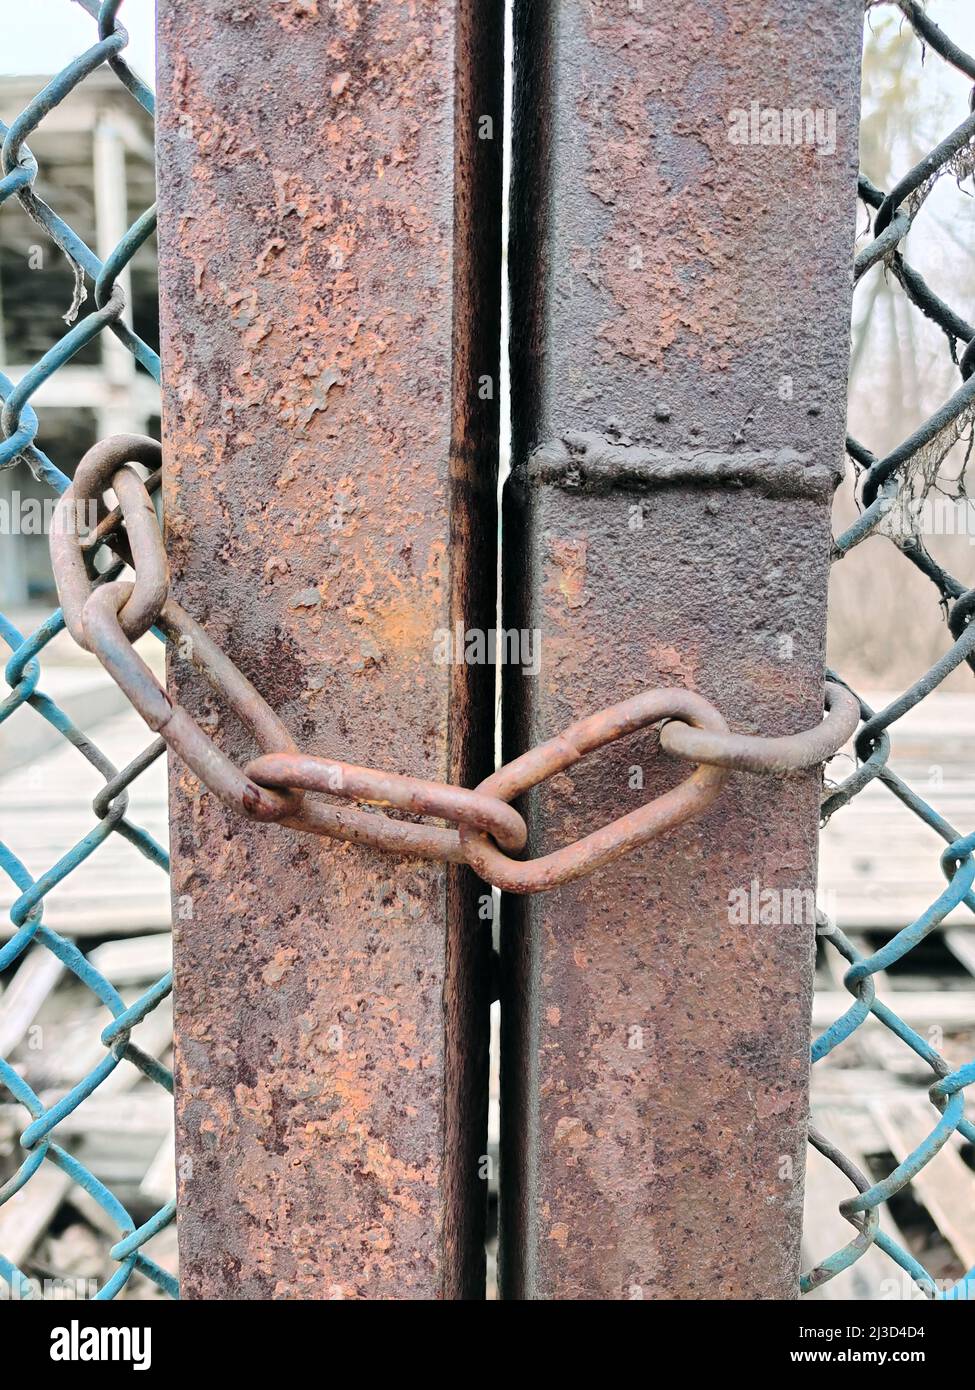 Close-up of a chain hangs on a rusty wire fence. The background is blurry Stock Photo